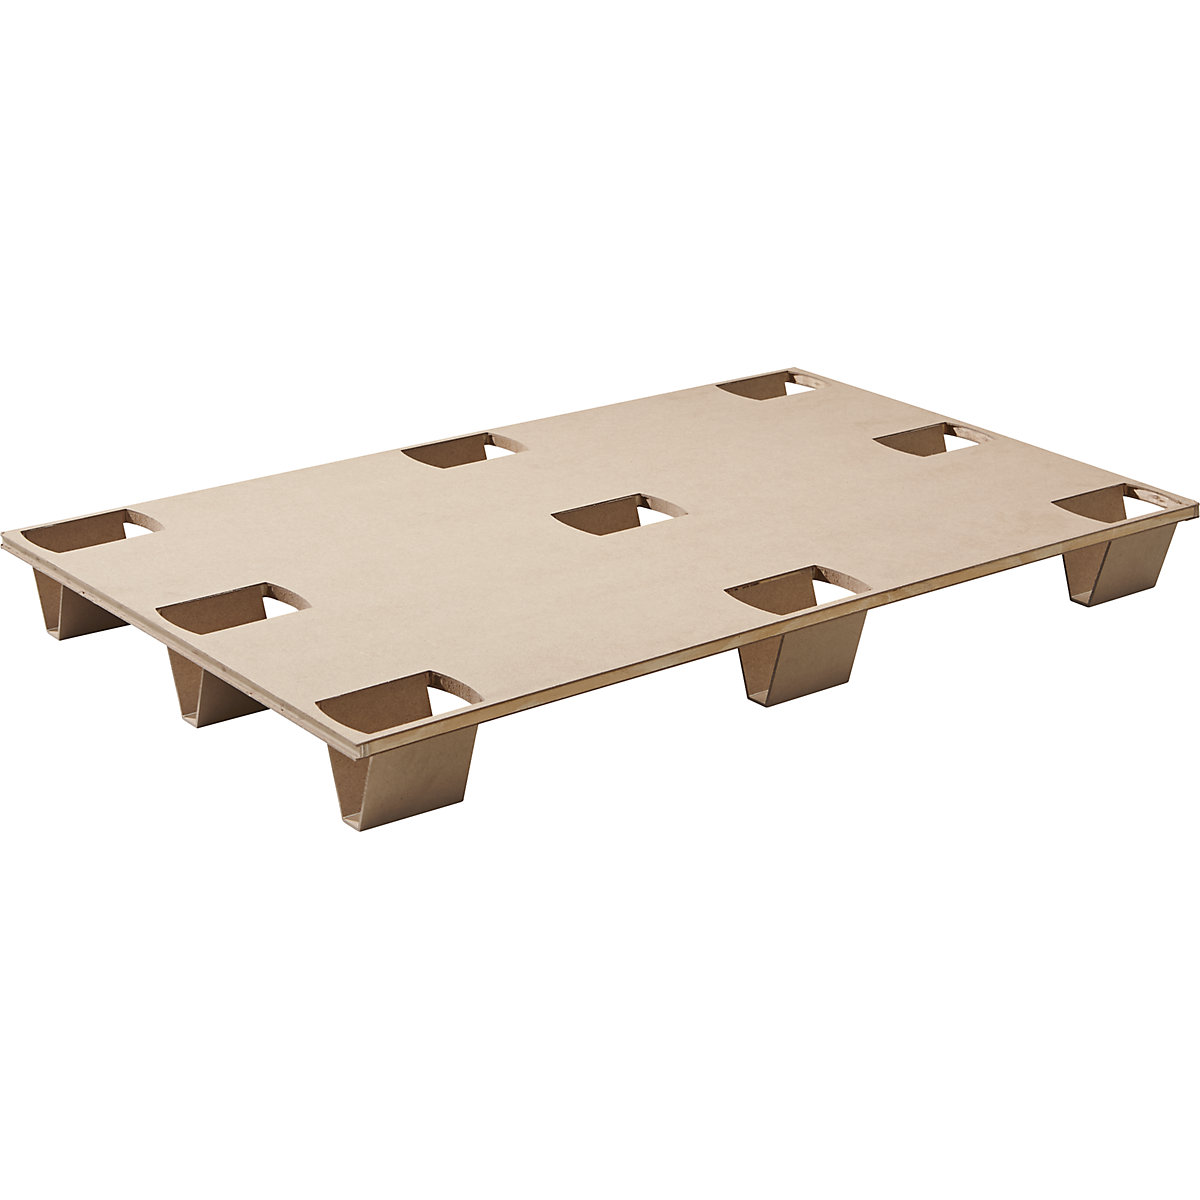 Disposable pallet, pack of 10, made of timber products, 1200 x 800 mm, 5+ packs-3